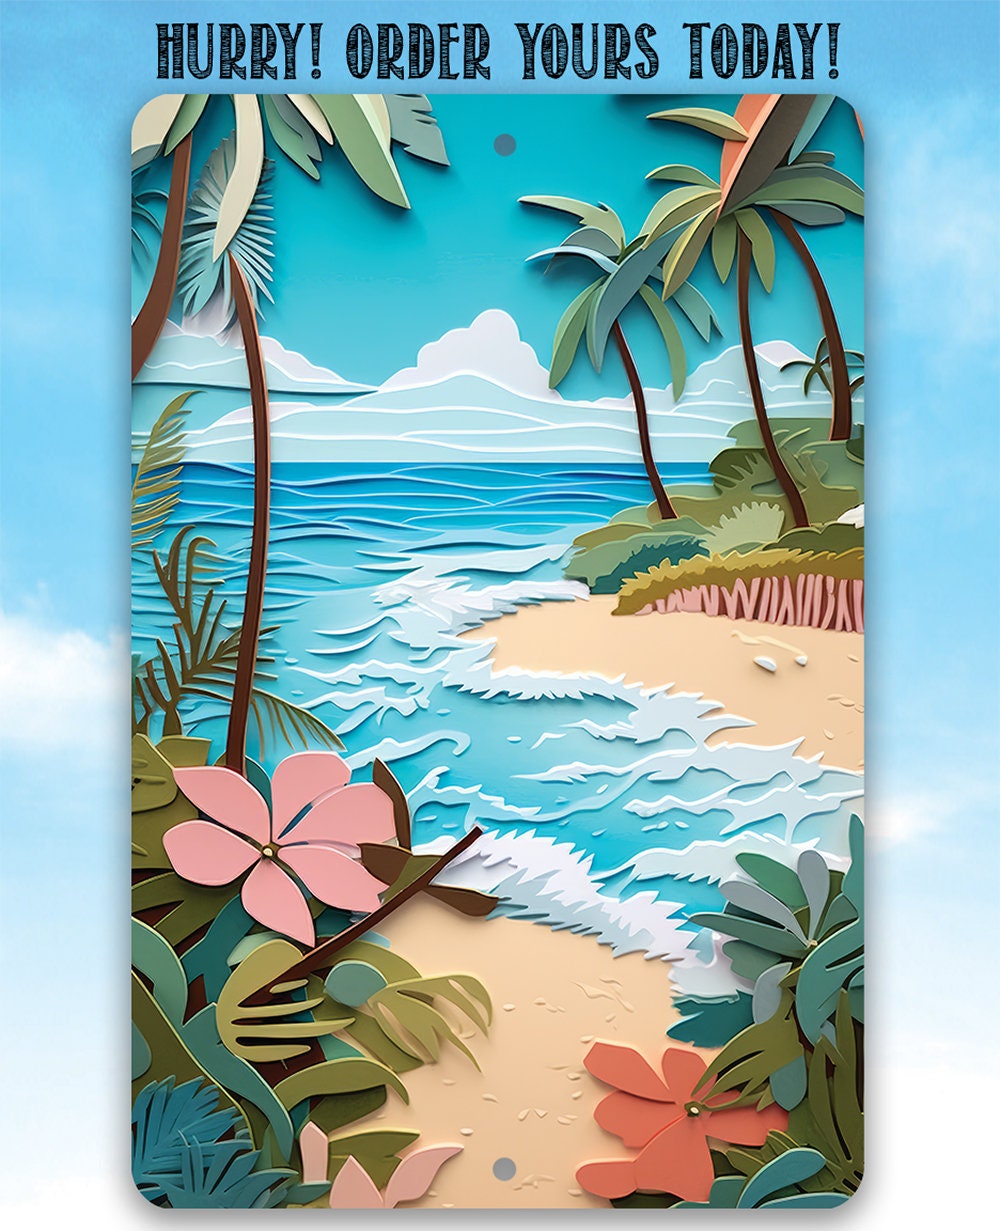 Tin - Beach Dreams - Beach House and Summer Surfing Decor - Durable Metal Sign - 8" x 12" or 12" x 18" Use Indoor/Outdoor -Housewarming Gift